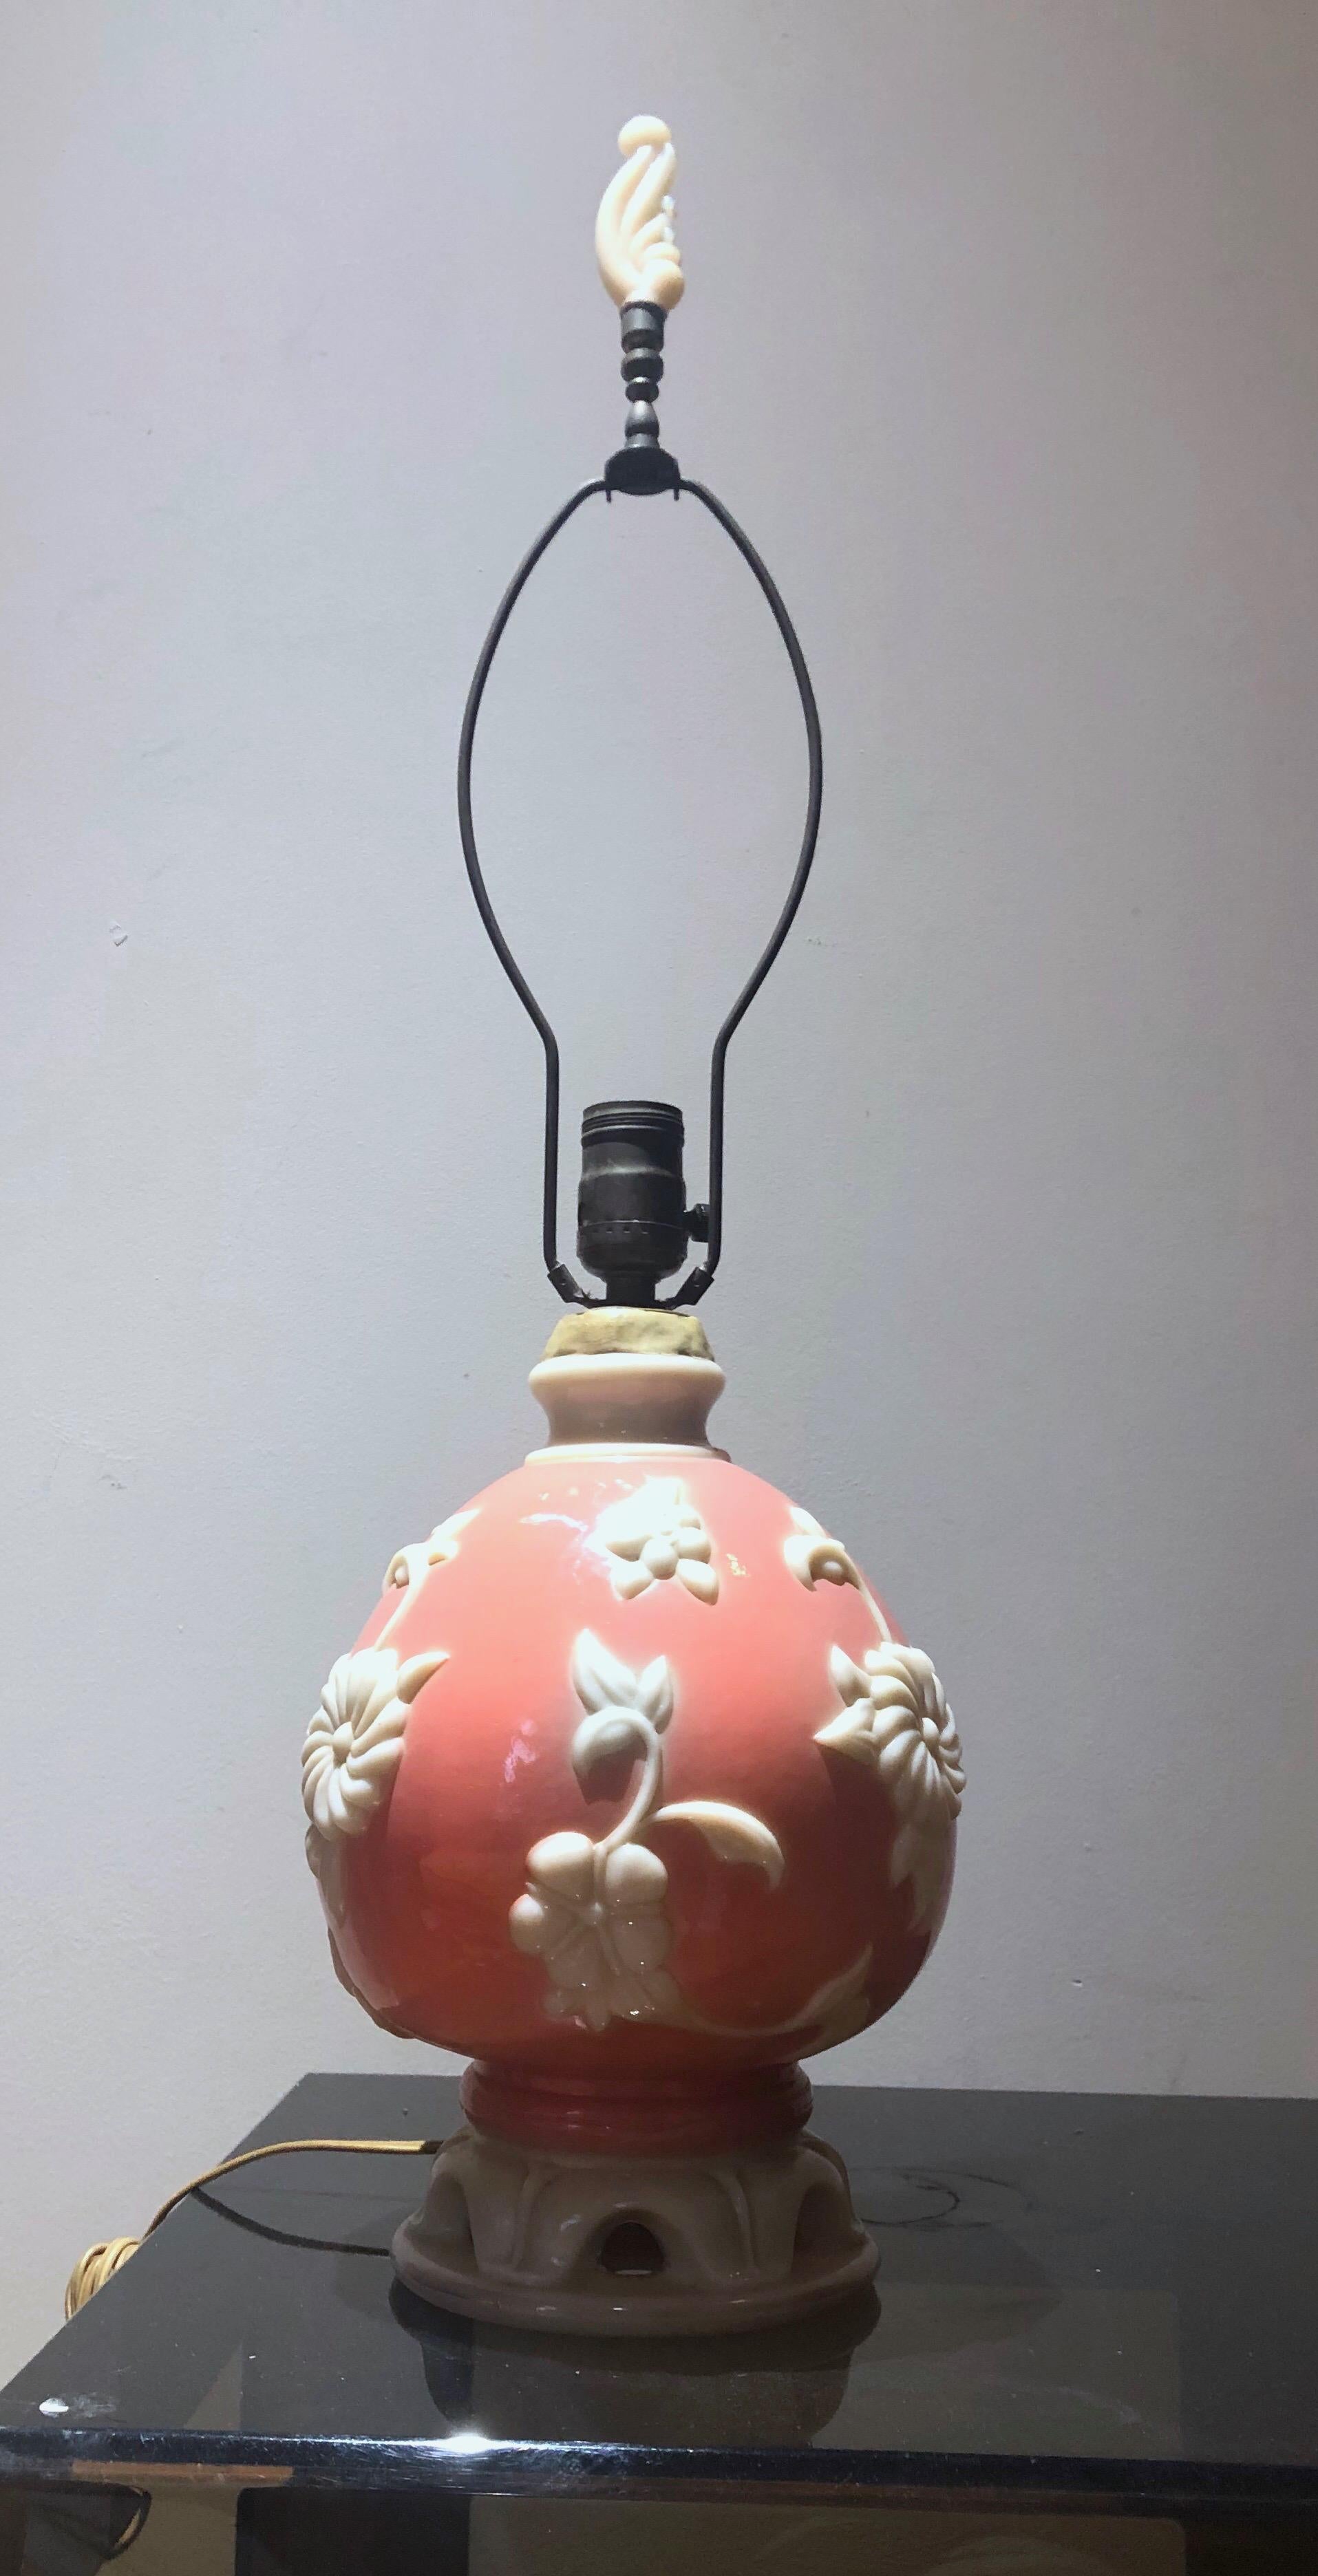 Lovely molded depression-era opaline glass lamp, blush pink with creamy white floral design in high relief. Stunning original opaline finial.